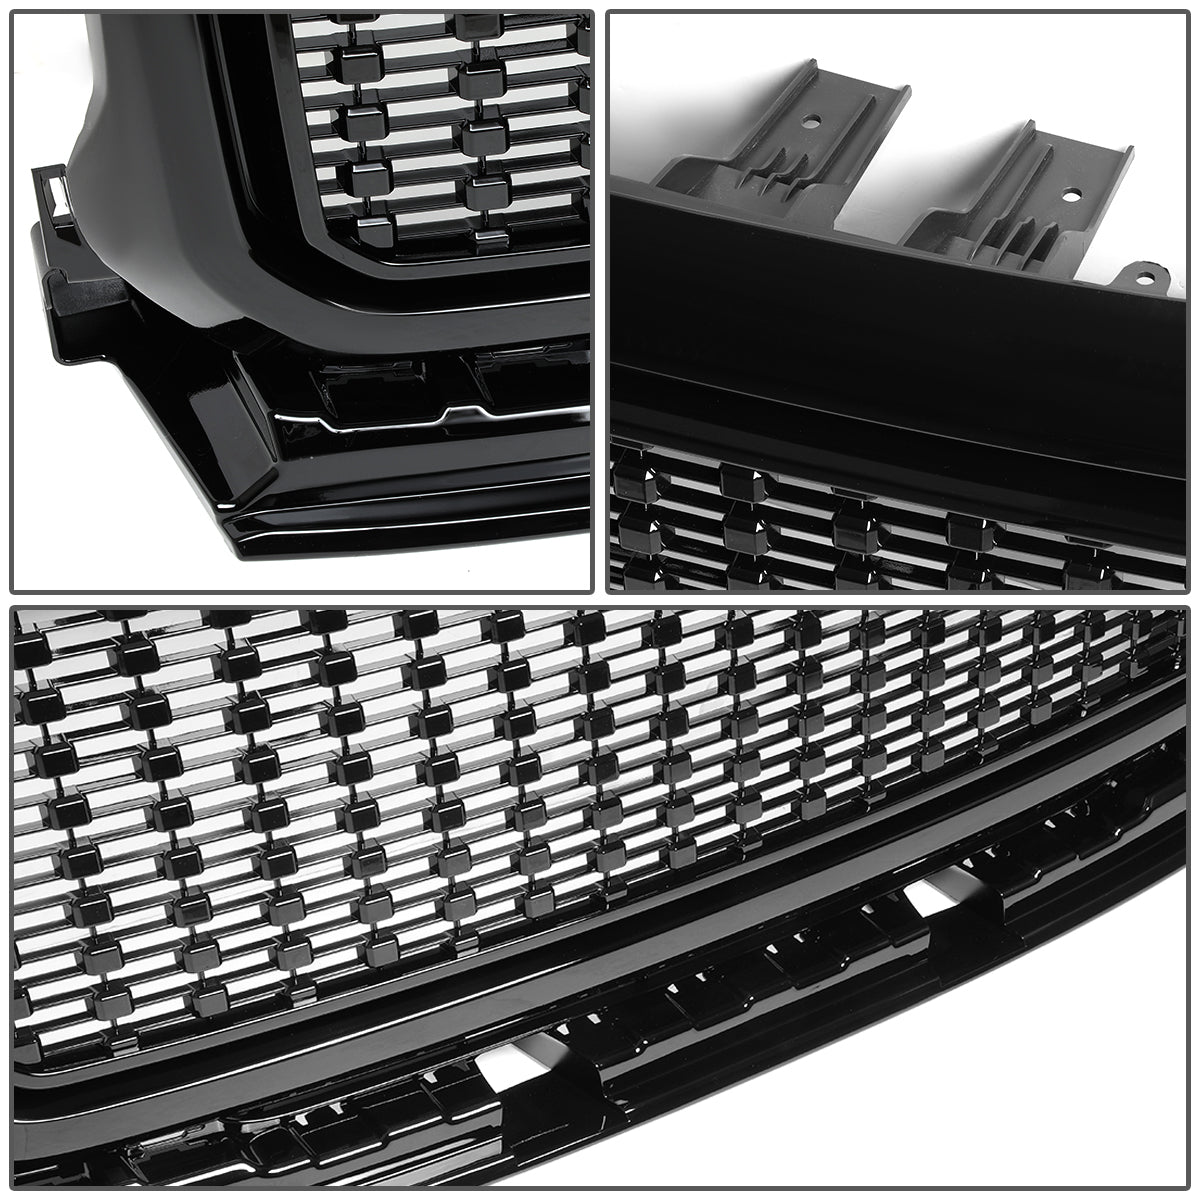 15-18 GMC Canyon Front Grille - Badgeless Denali Style Mesh - Black